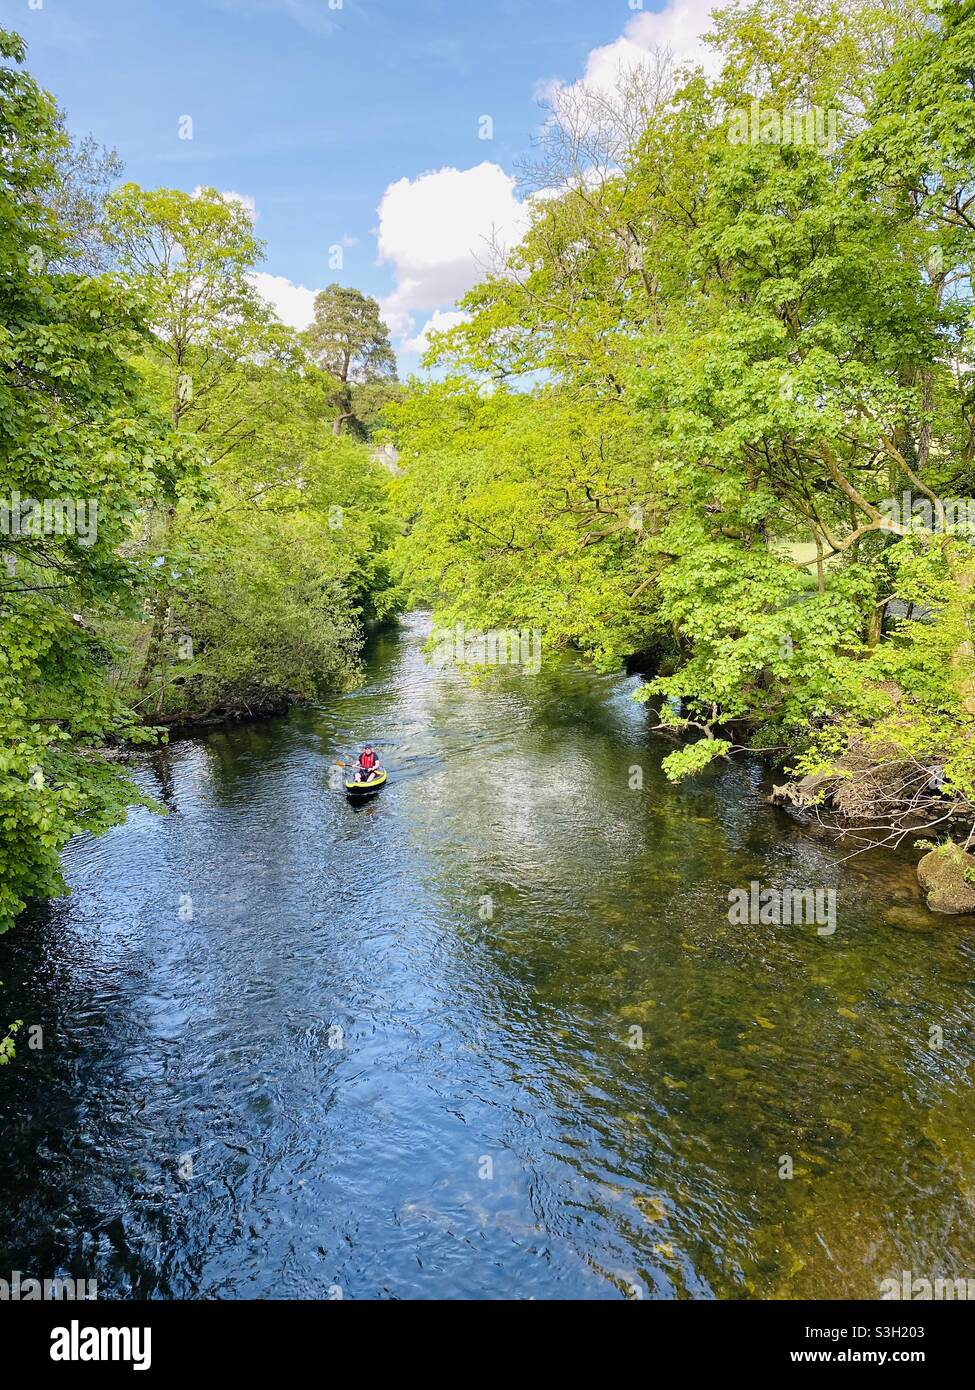 Canoeing down the River Brathay on a warm summers day Stock Photo